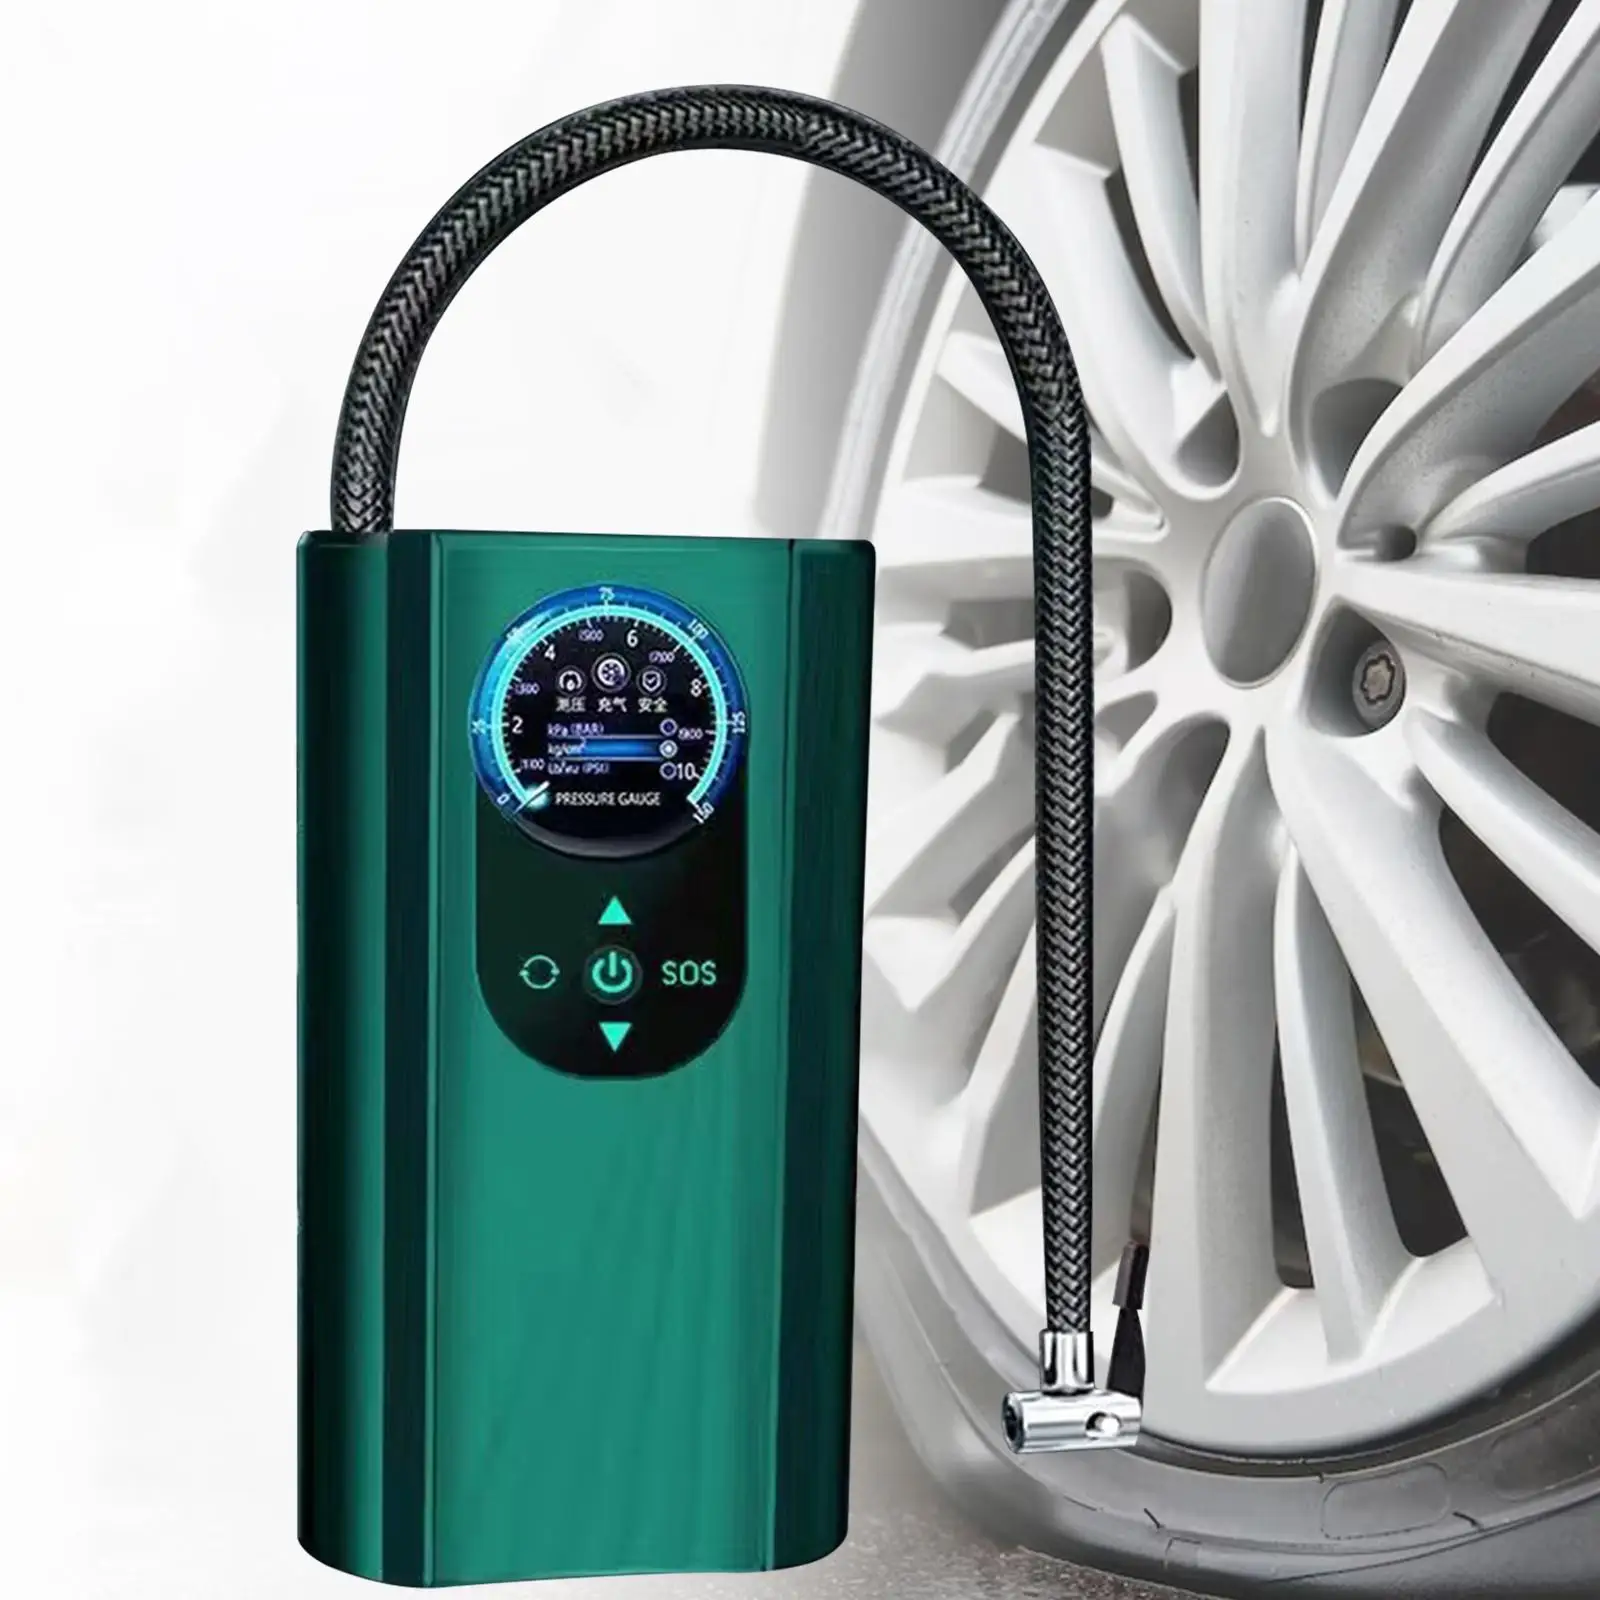 Portable Air Compressor with Pressure Gauge Fast LCD Display Screen Electric Tire Pump for Bicycle Basketball SUV Ball Bike